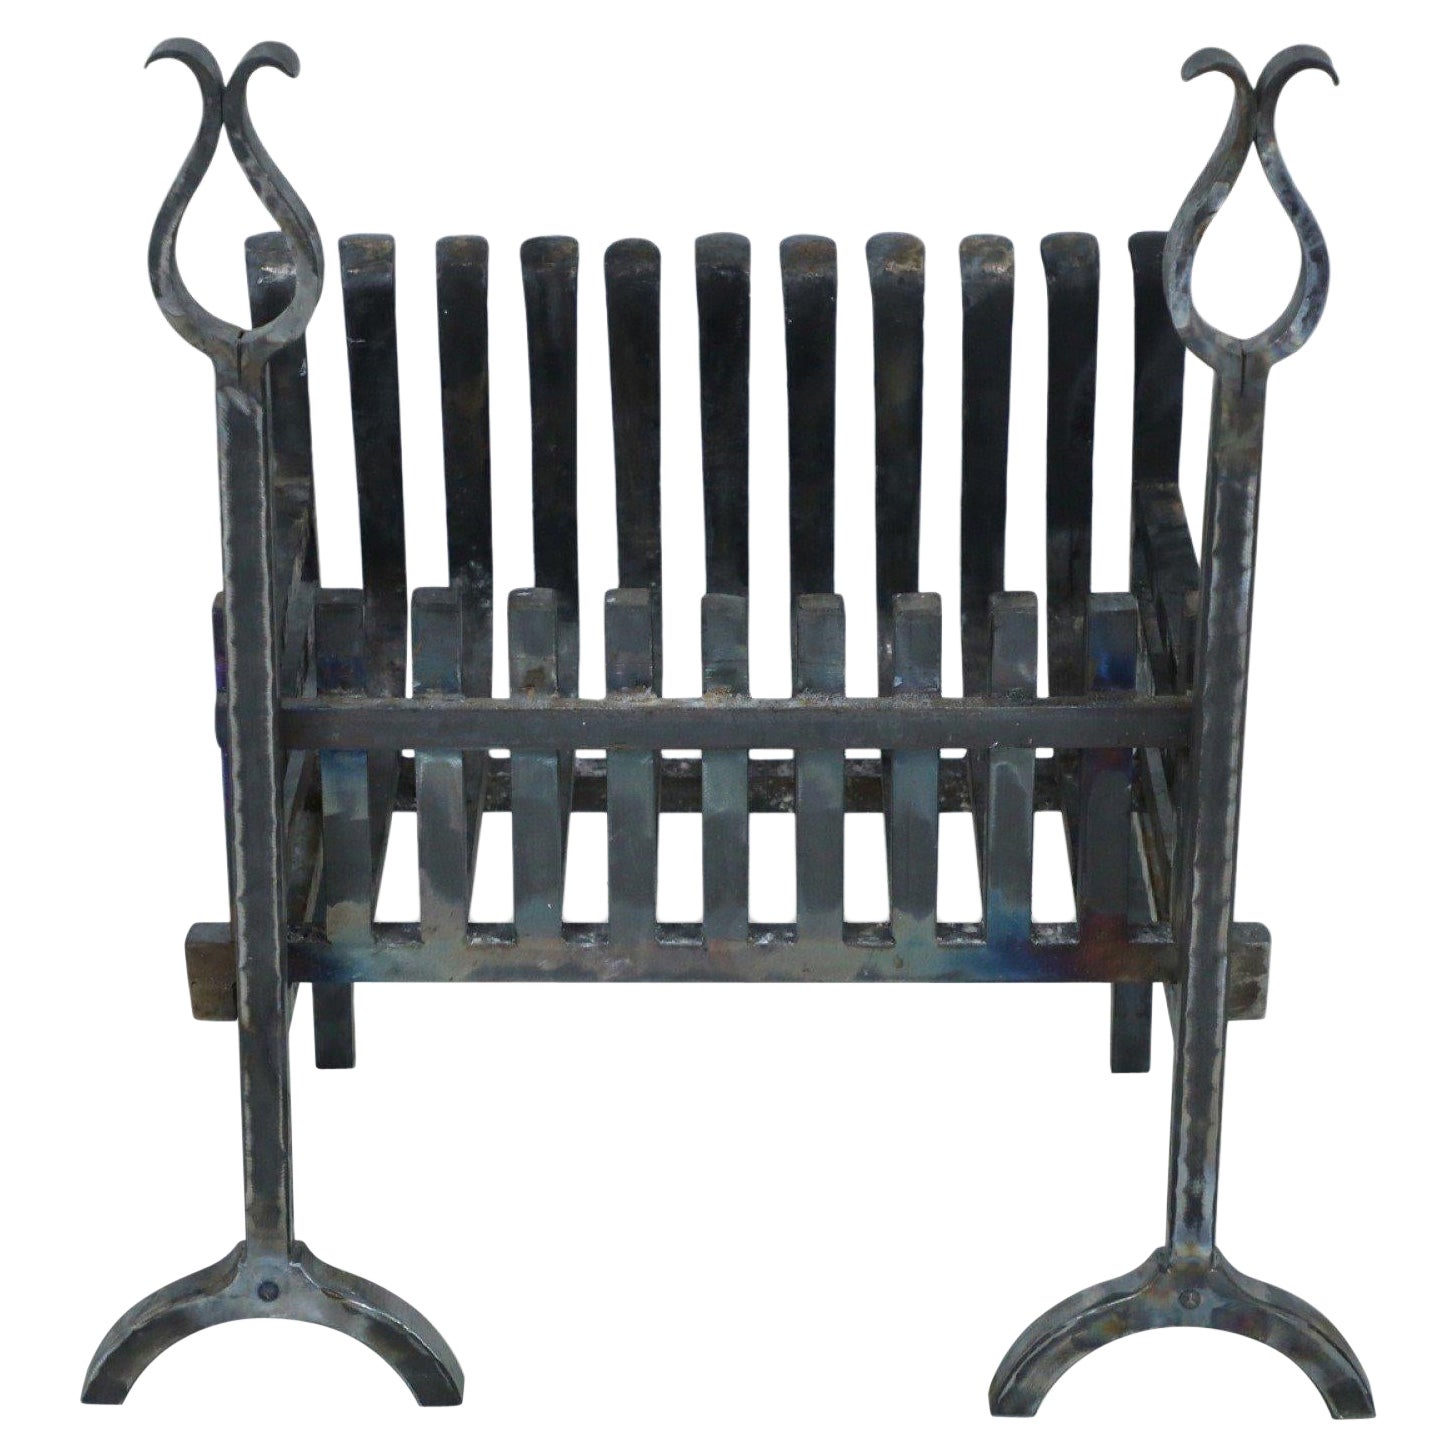 American Art Deco Iron Fire Grate with Andirons